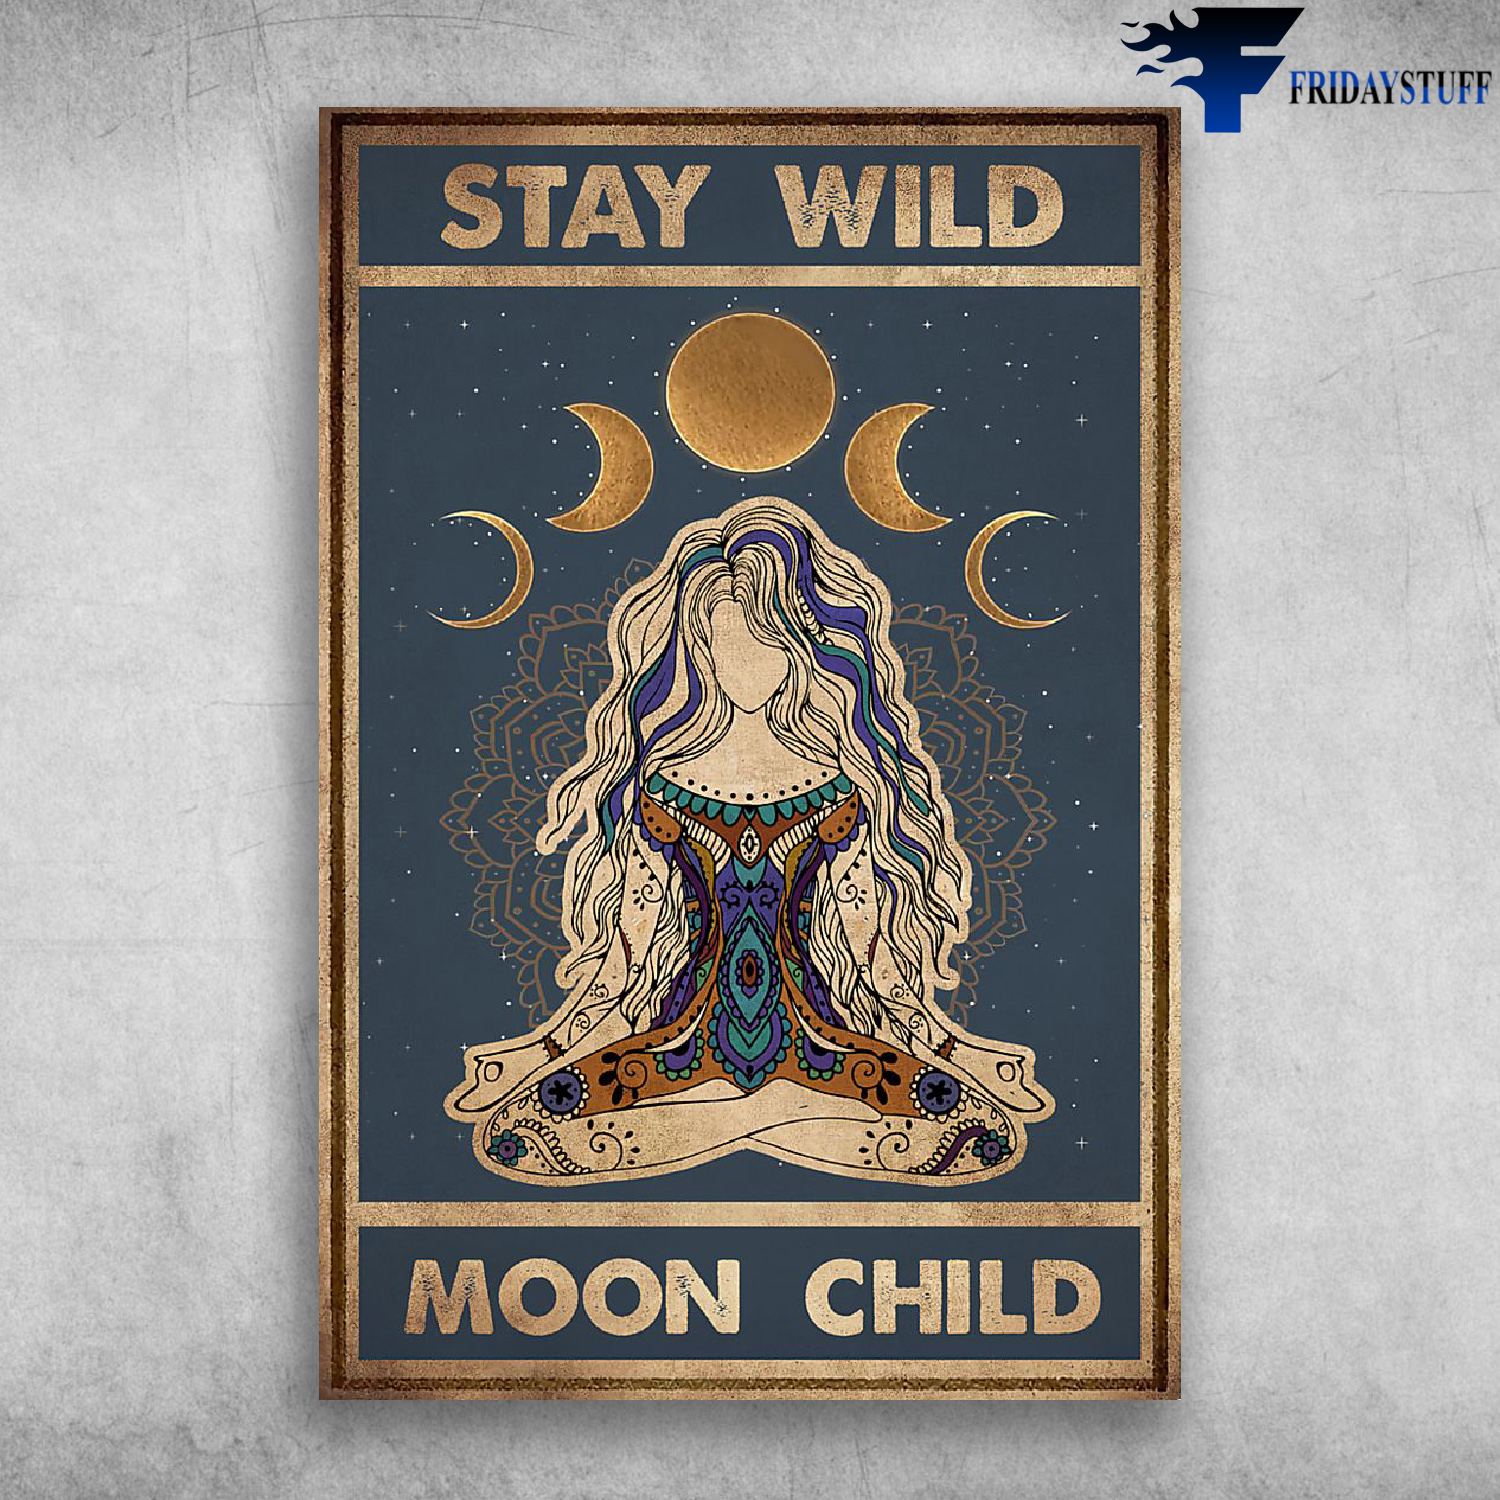 Bee Poster Digital Prints Vintage Poster Bee Stay Wild Moon Child Poster Funny Poster Print Art Funny Gift Printable Wall Art